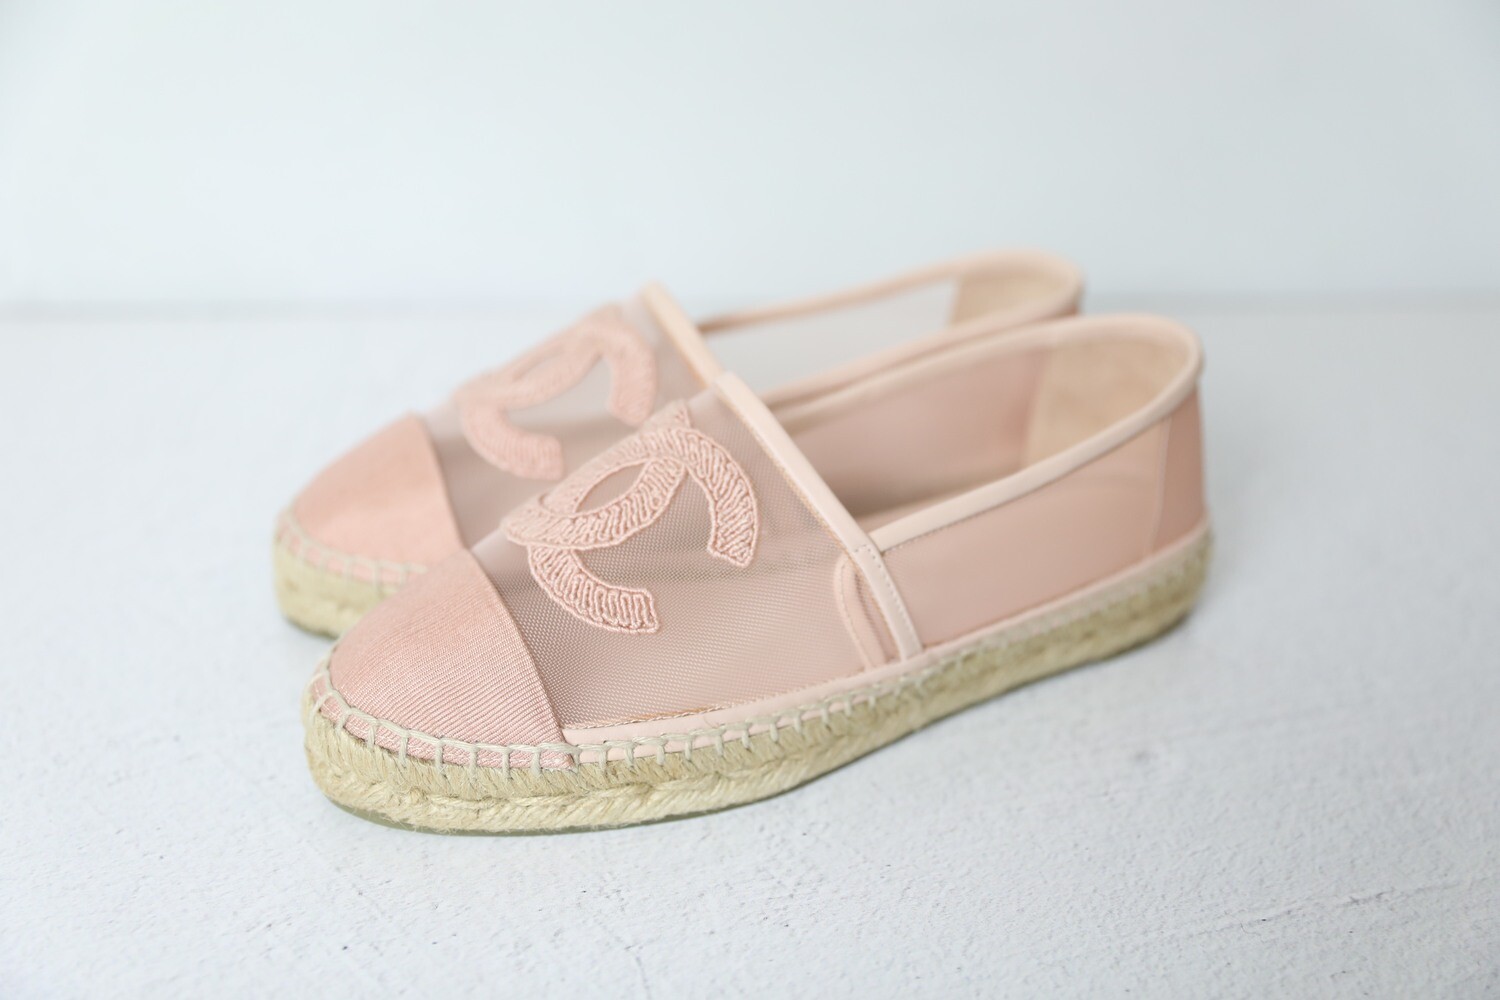 Chanel Espadrilles, Pink Mesh, Size 37, New in Box WA001